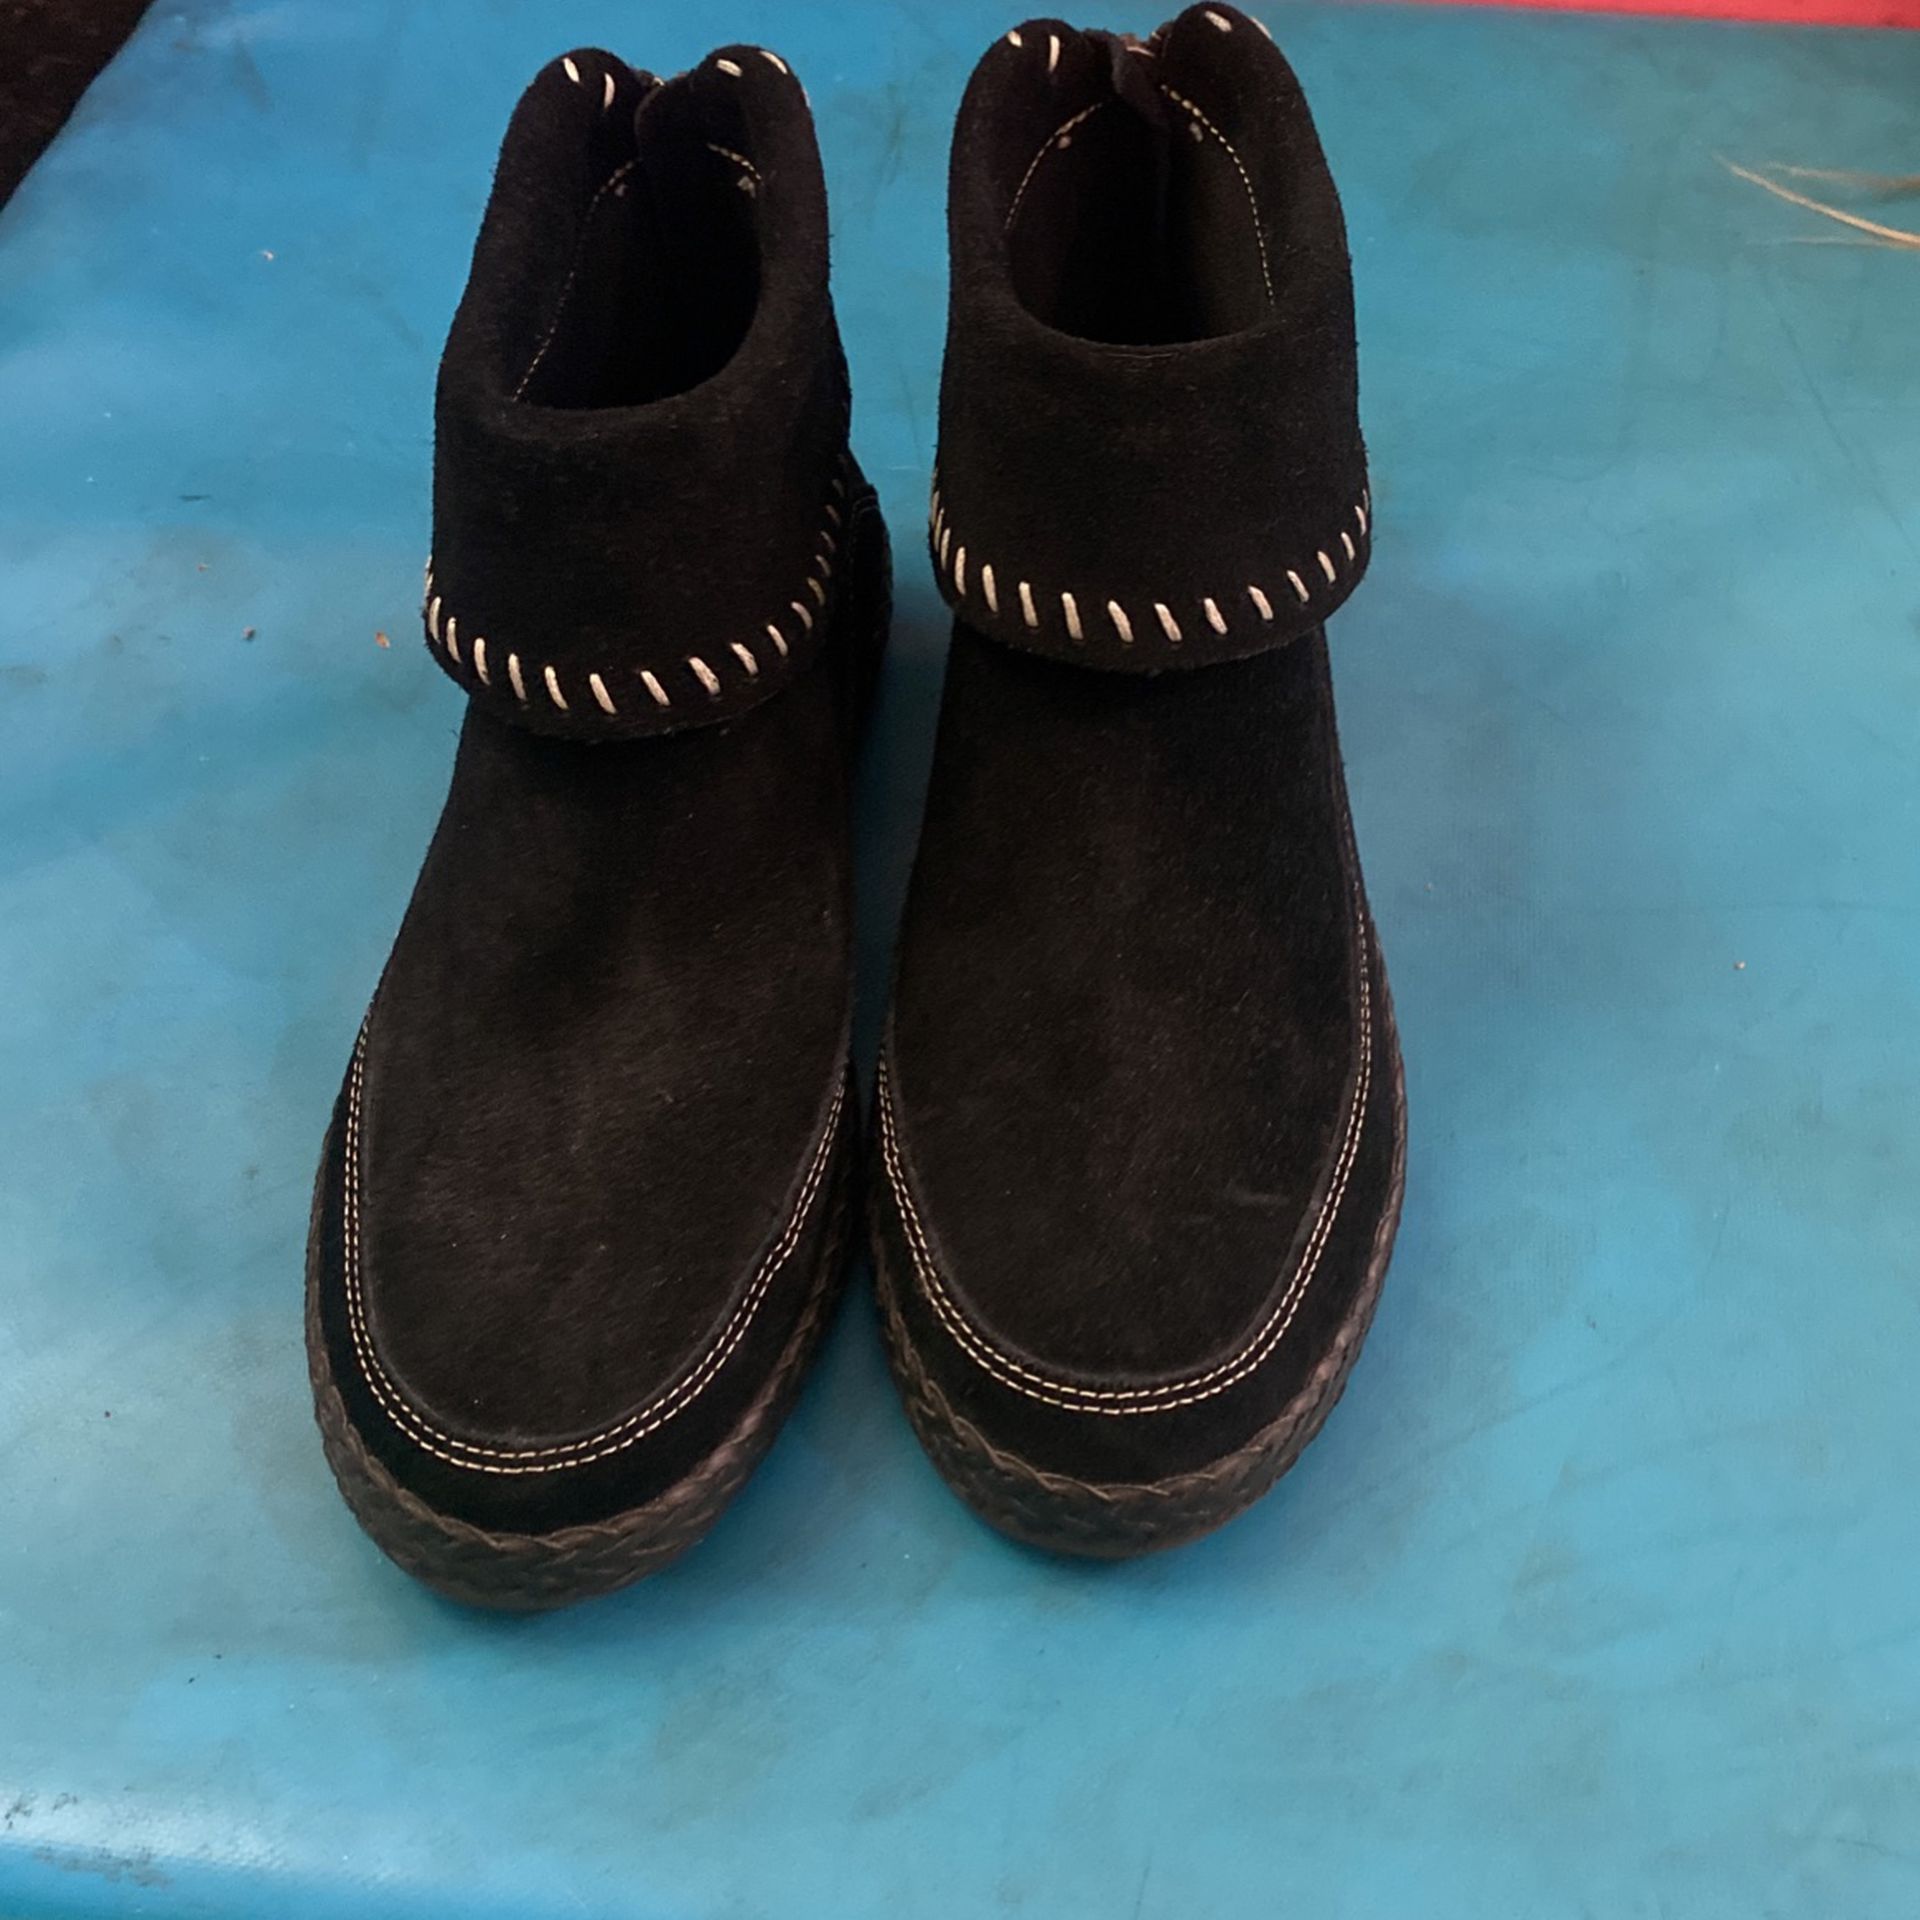 Uggs Black Suede Boots Women Size 8